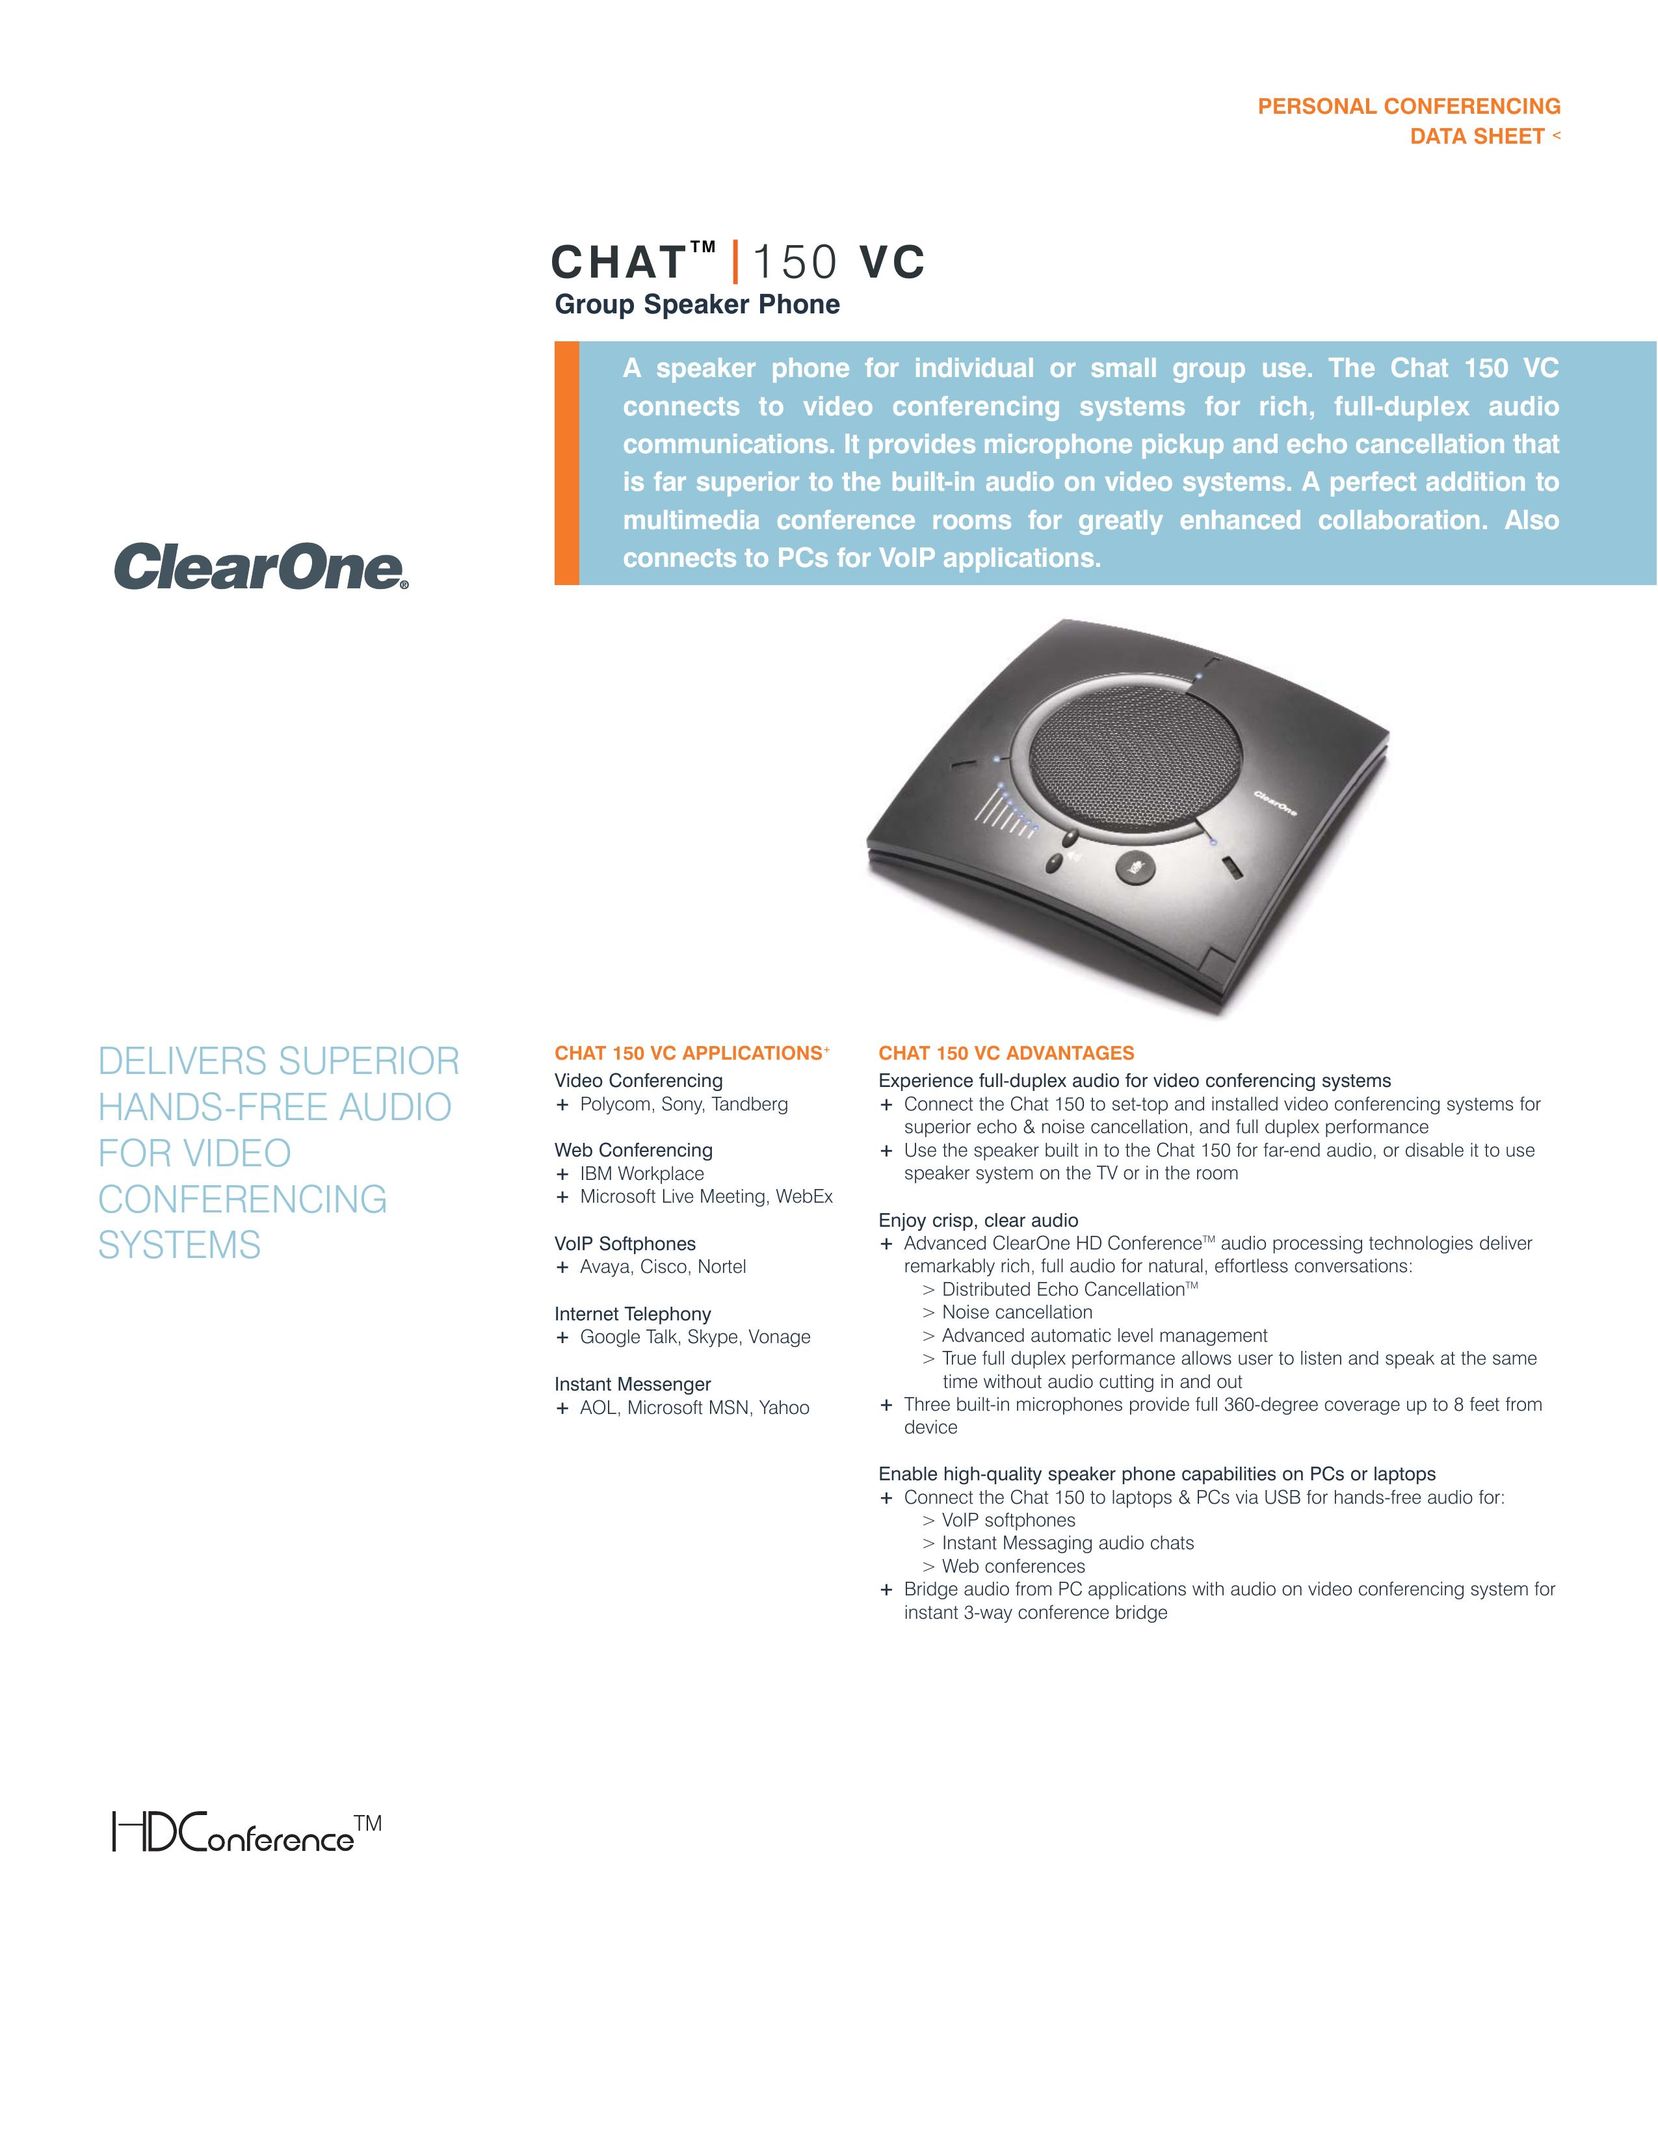 ClearOne comm 150 VC Corded Headset User Manual